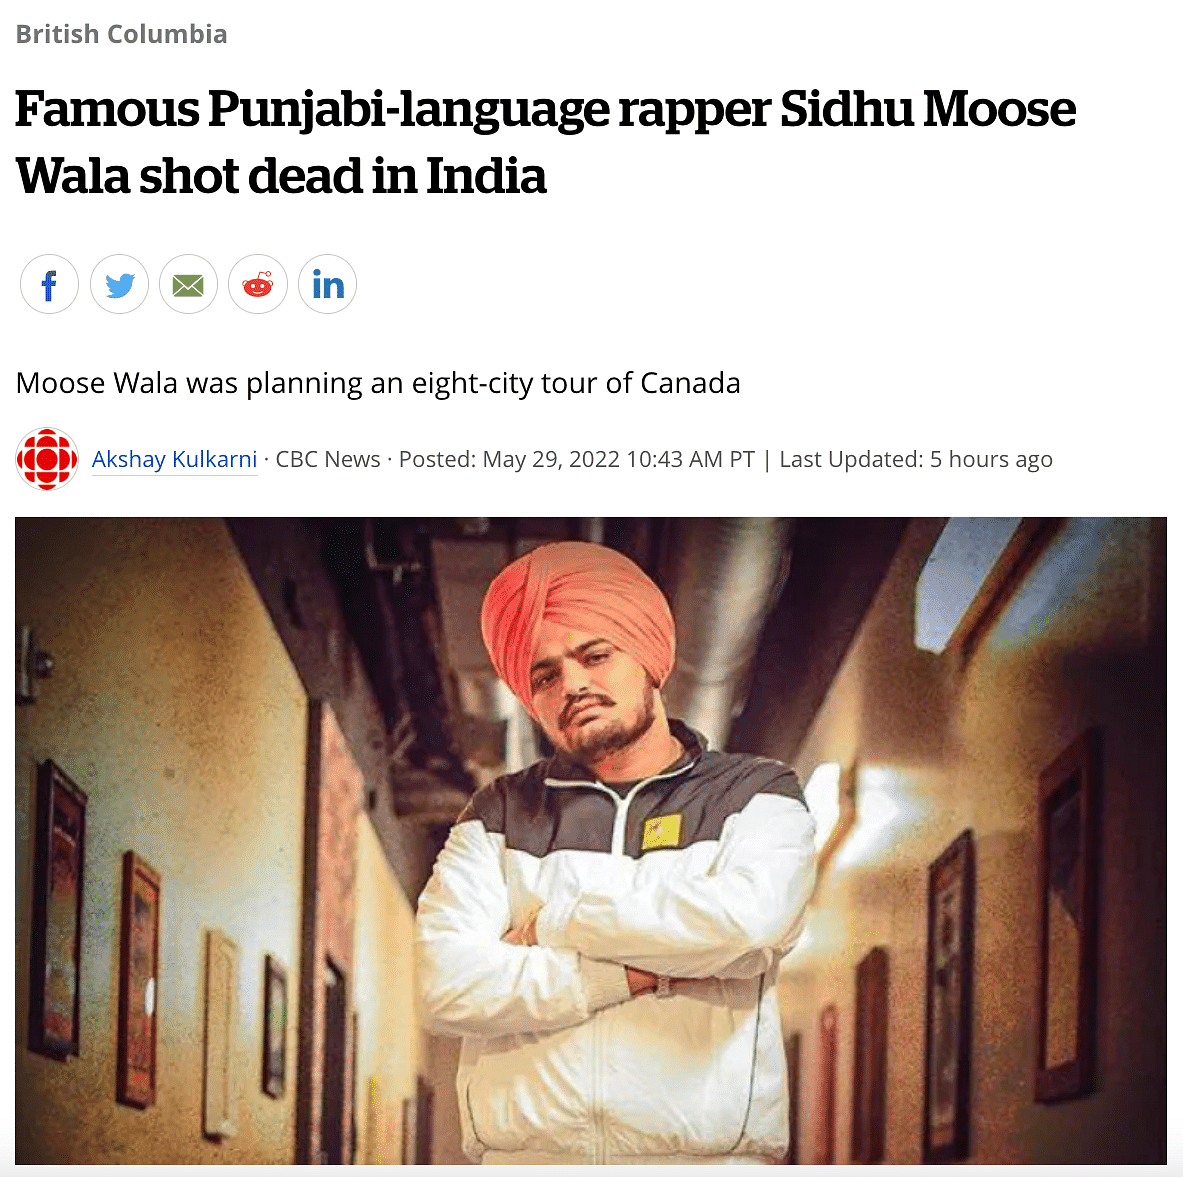 Gulf News wrote that "the popular Punjabi singer-actor-politician commanded a cult following that few could match."